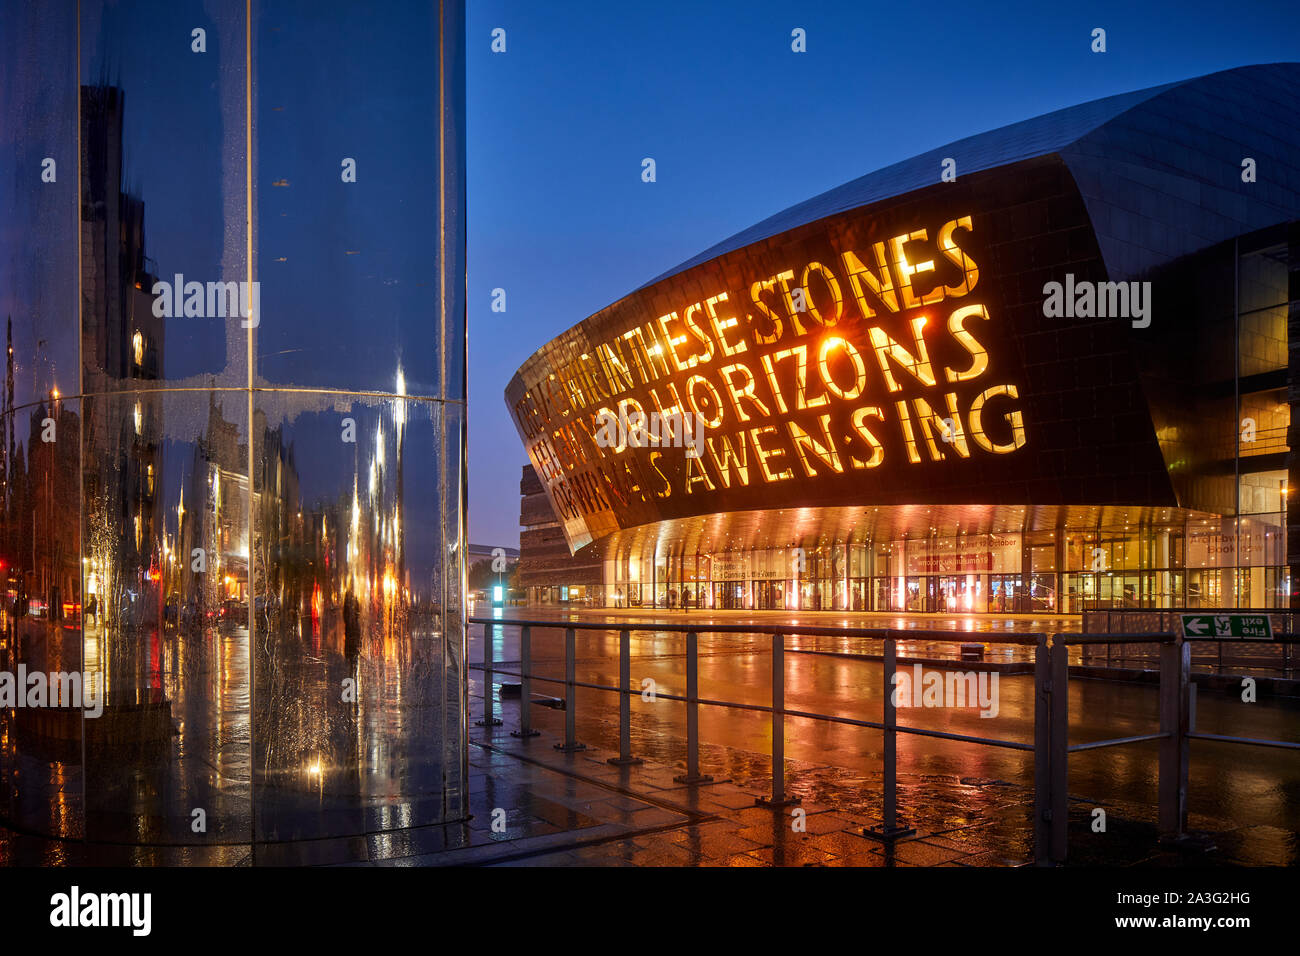 Wales Millennium Centre arts centre theatre located Cardiff Bay designed by Percy Thomas Partnership Stock Photo